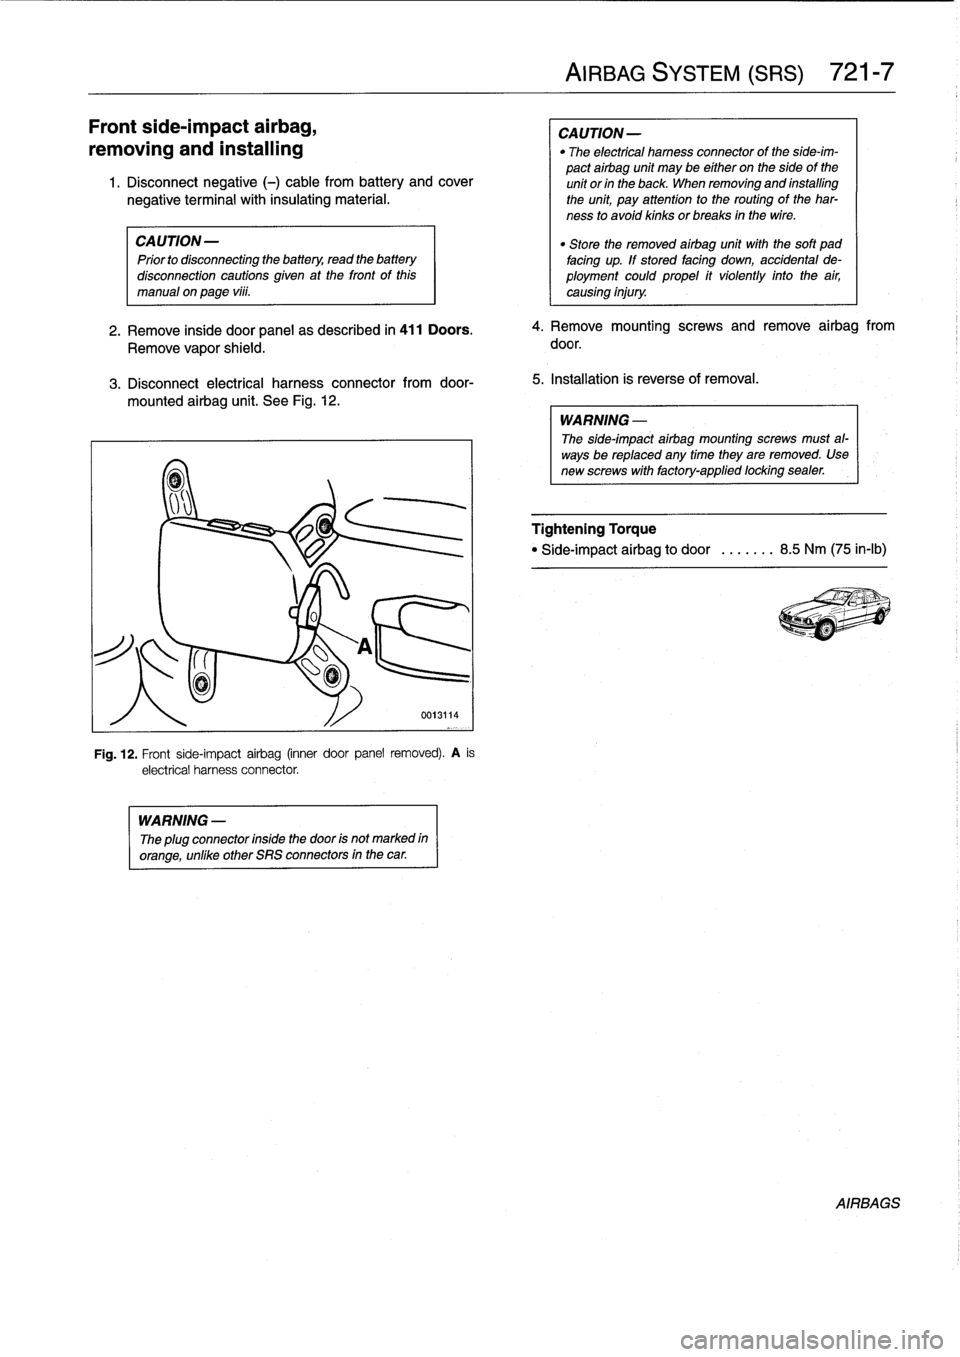 BMW 318i 1997 E36 Repair Manual 
Front
side-impact
airbag,

removing
and
installing

1
.
Disconnect
negative
(-)
cable
from
battery
and
cover

negative
terminal
with
insulating
material
.

CA
UTION-

	

"
Store
the
removed
airbag
un